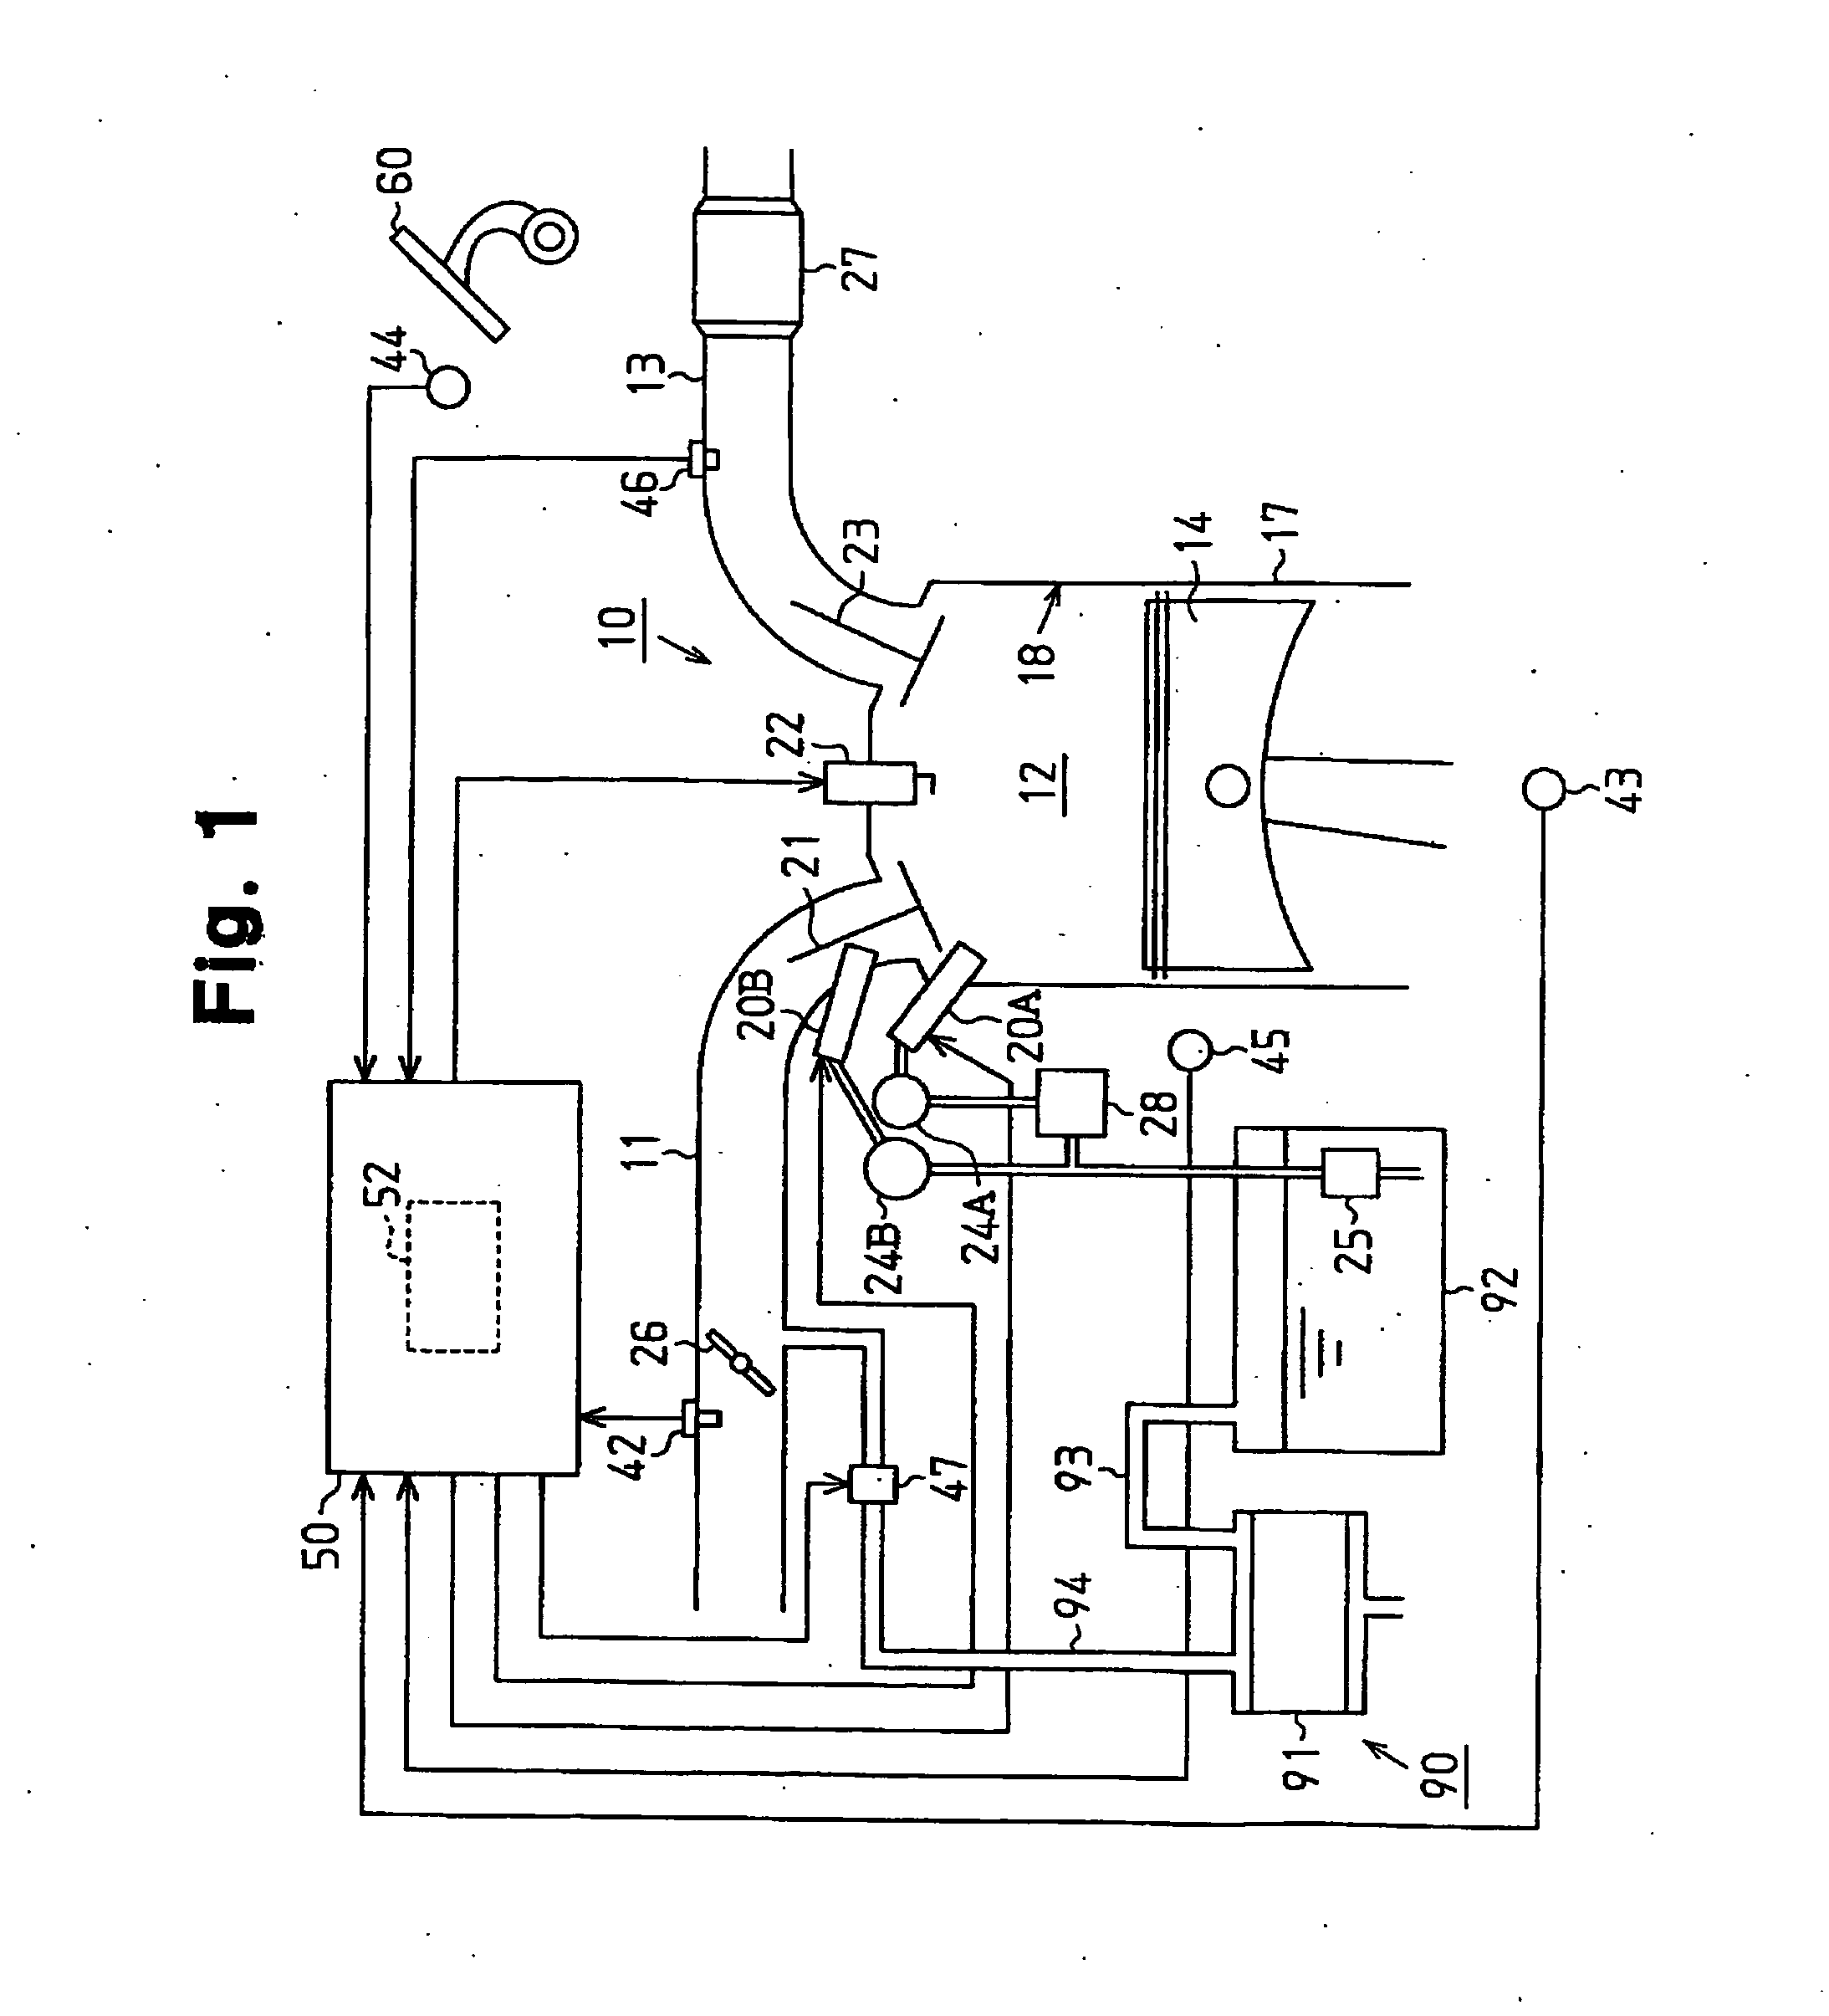 Fuel injection control apparatus for internal combustion engine